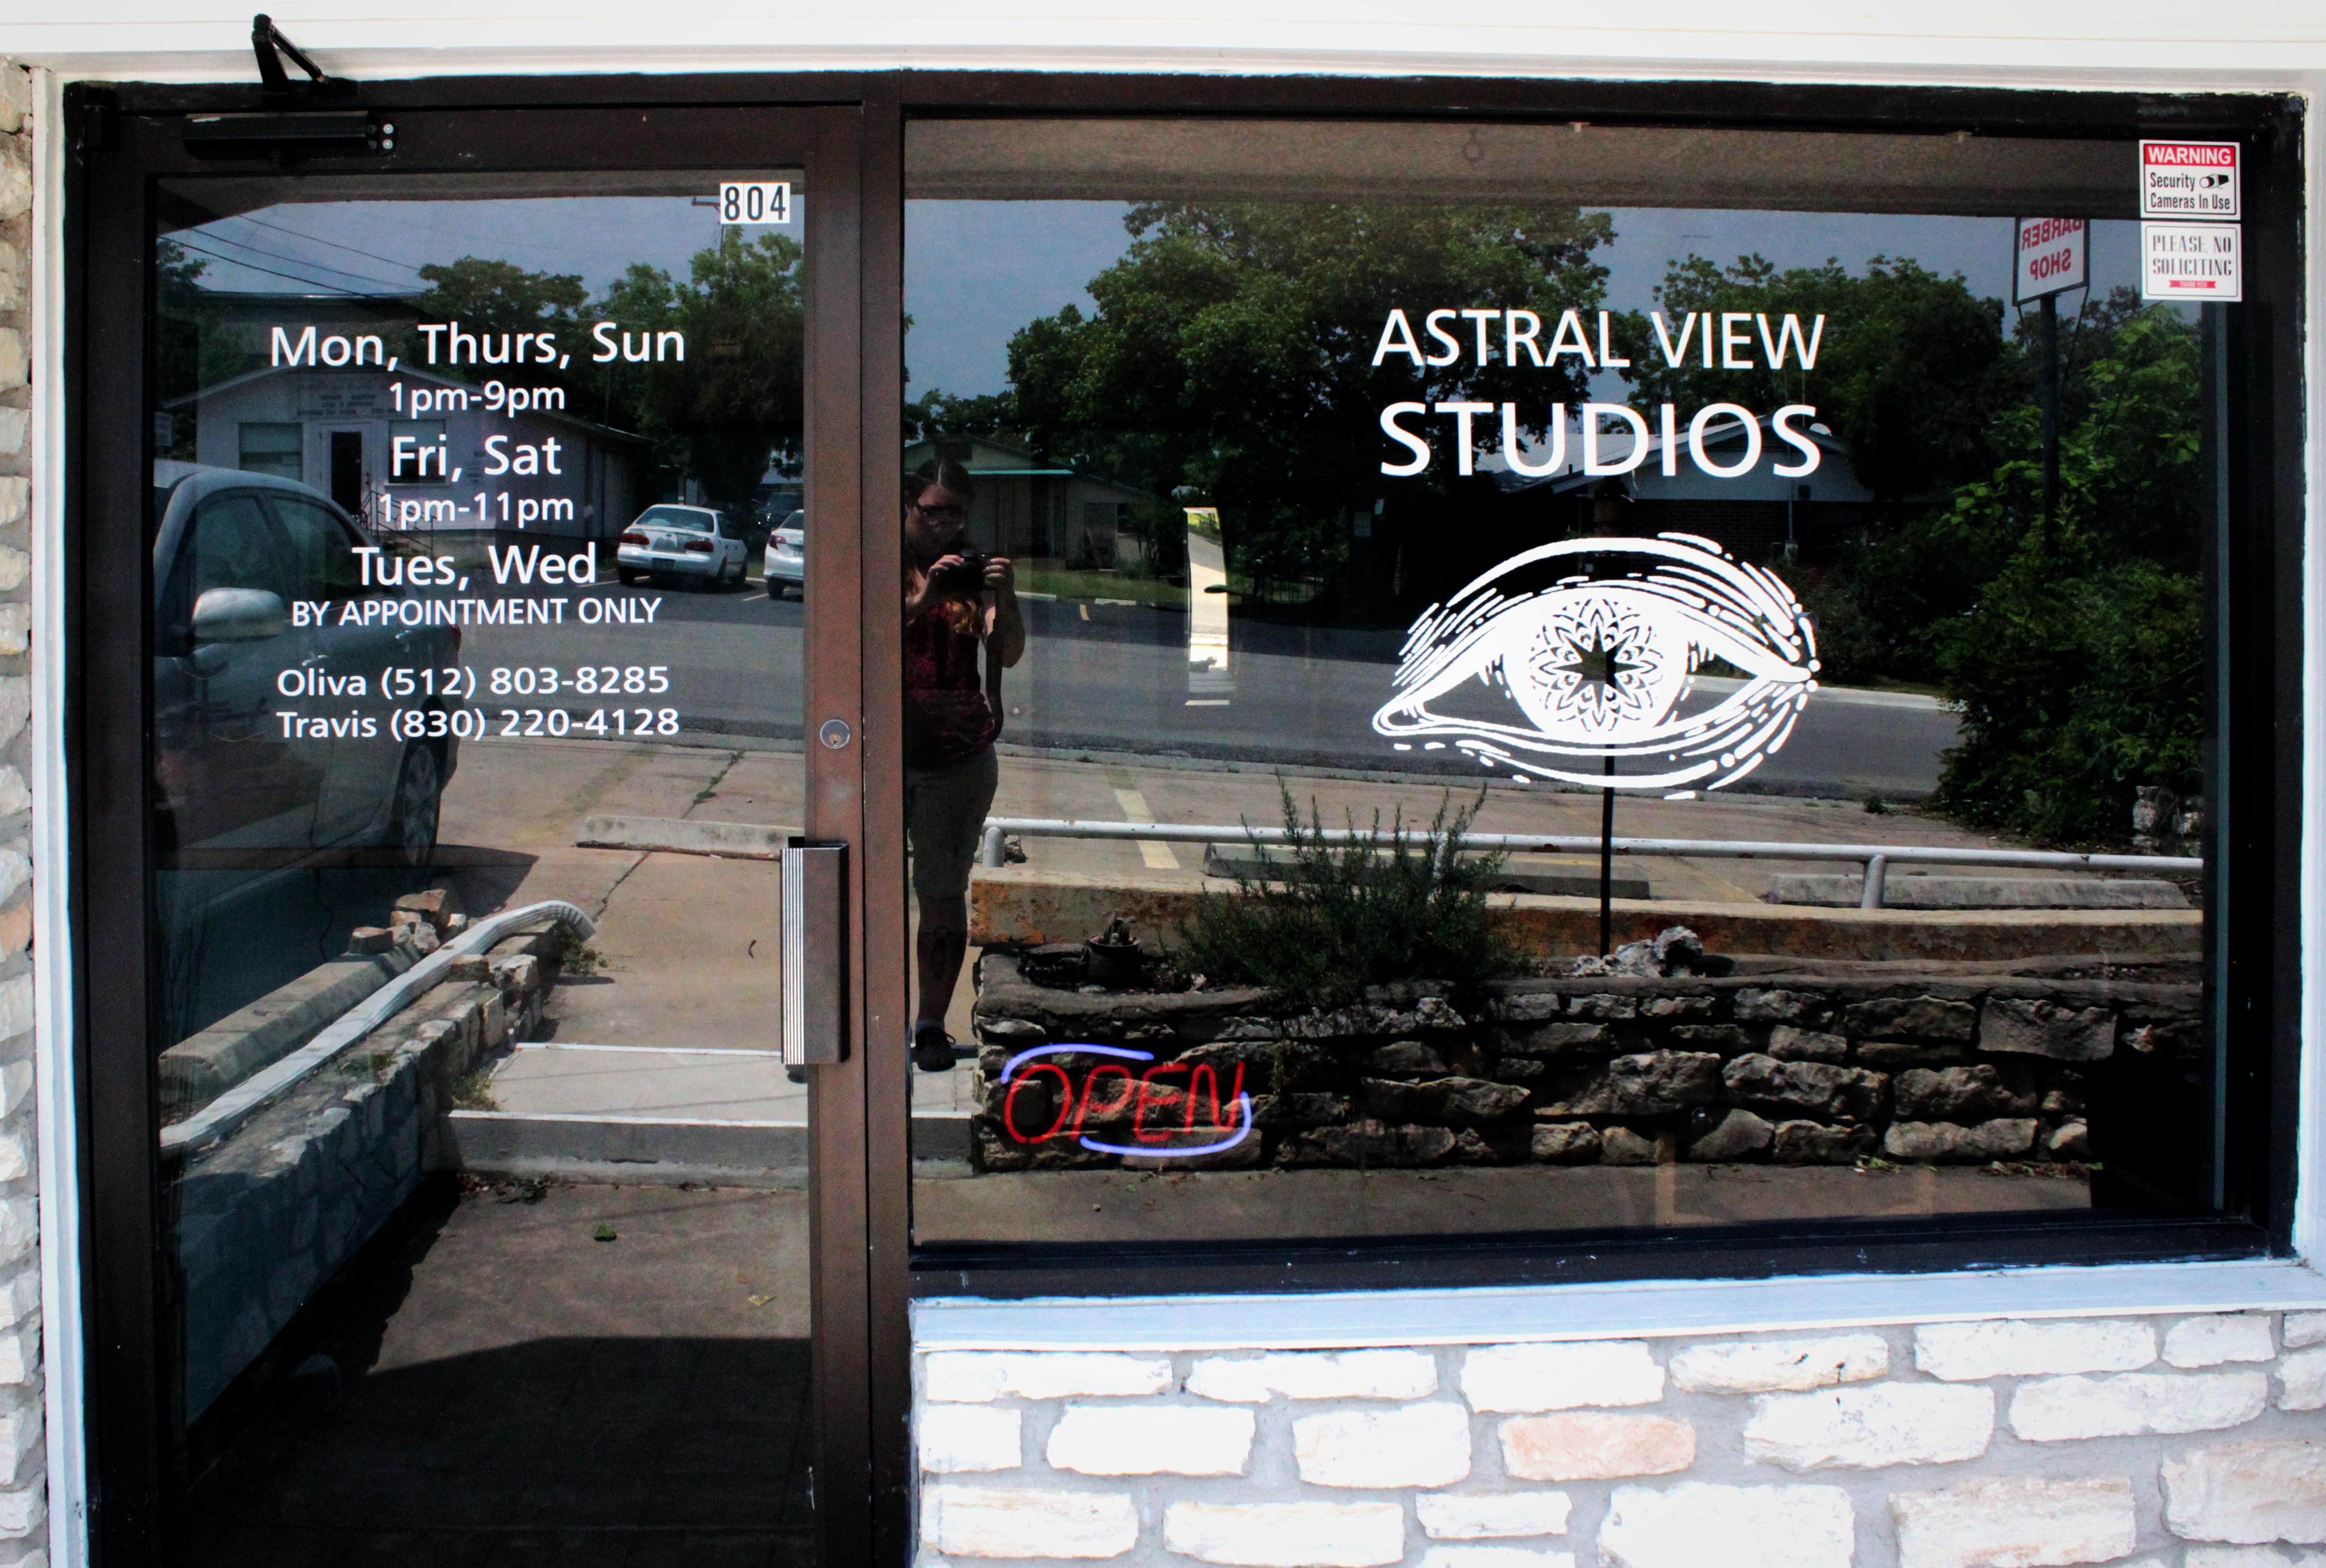 Astral View Studios 804 Sixth St., Marble Falls, TX 78654